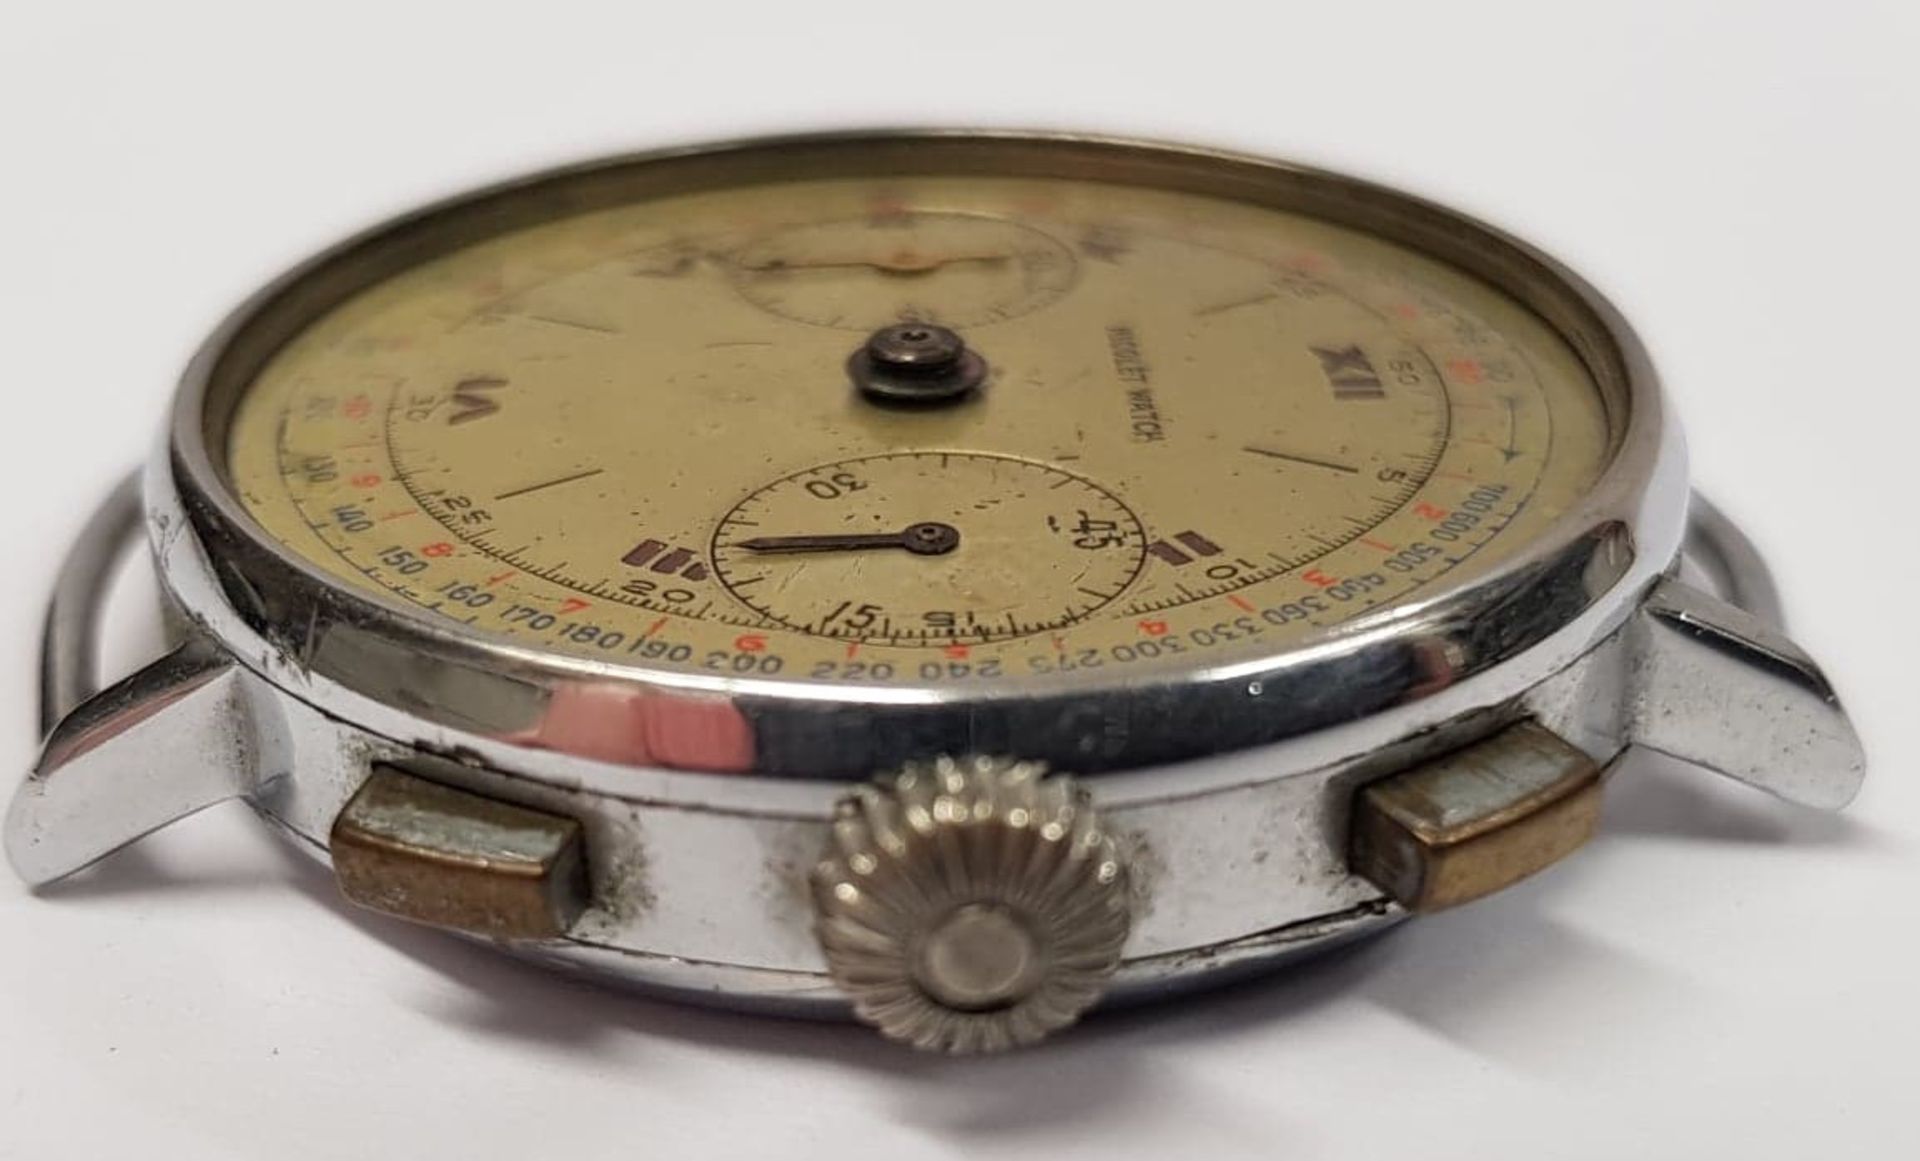 Nicolet Chronograph Swiss Watch For Restoration A/F - Image 3 of 6